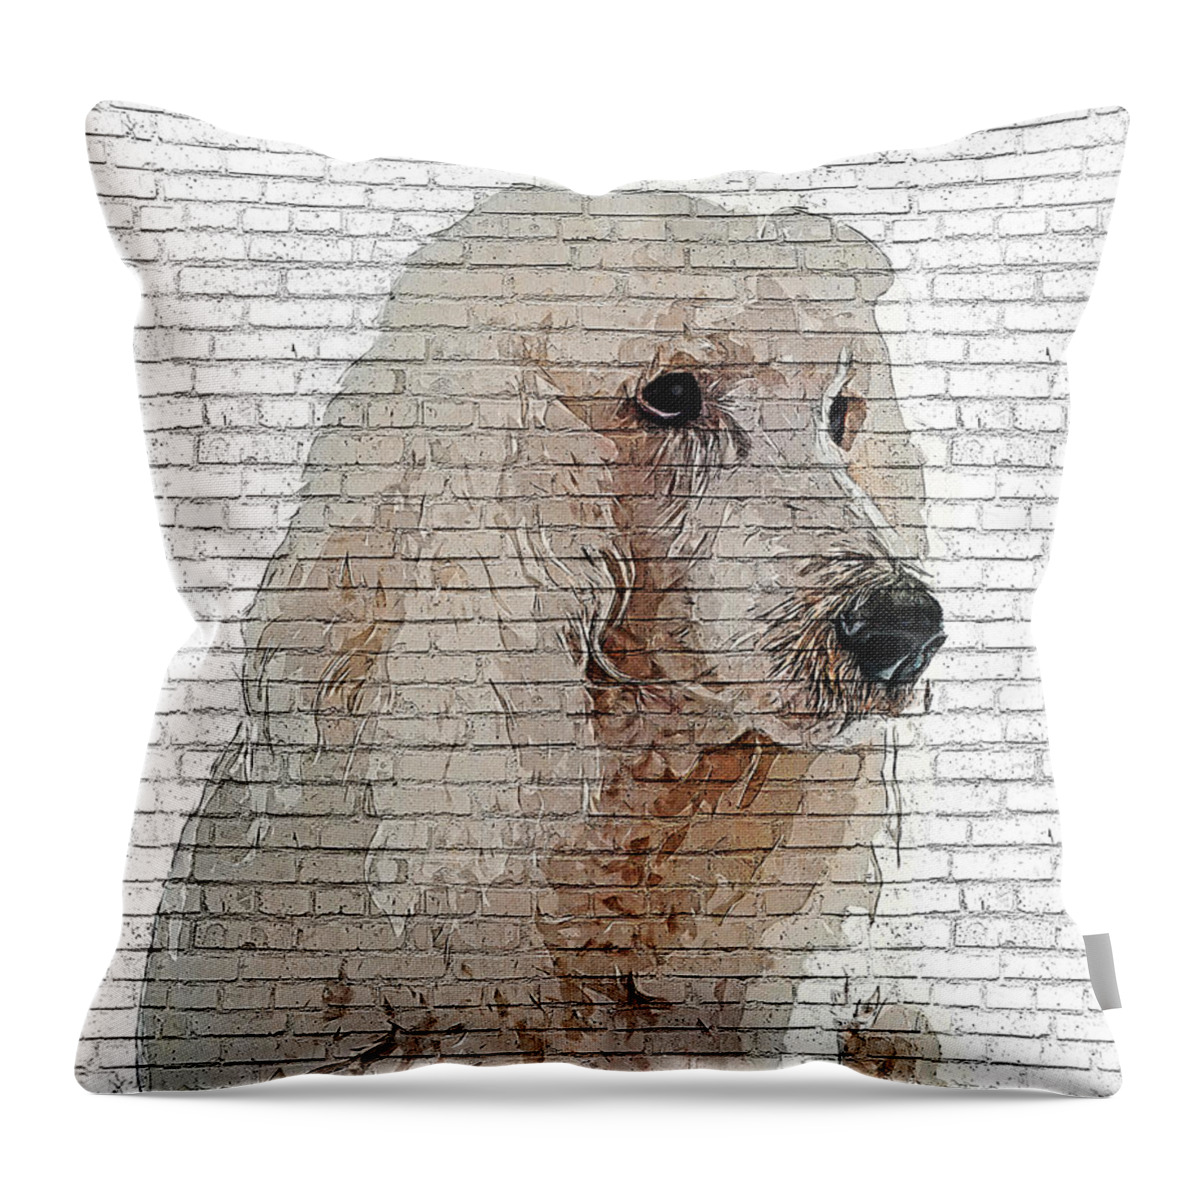 Standard Throw Pillow featuring the painting Way too cool, Standard Poodle Dog - Brick Block Background by Custom Pet Portrait Art Studio